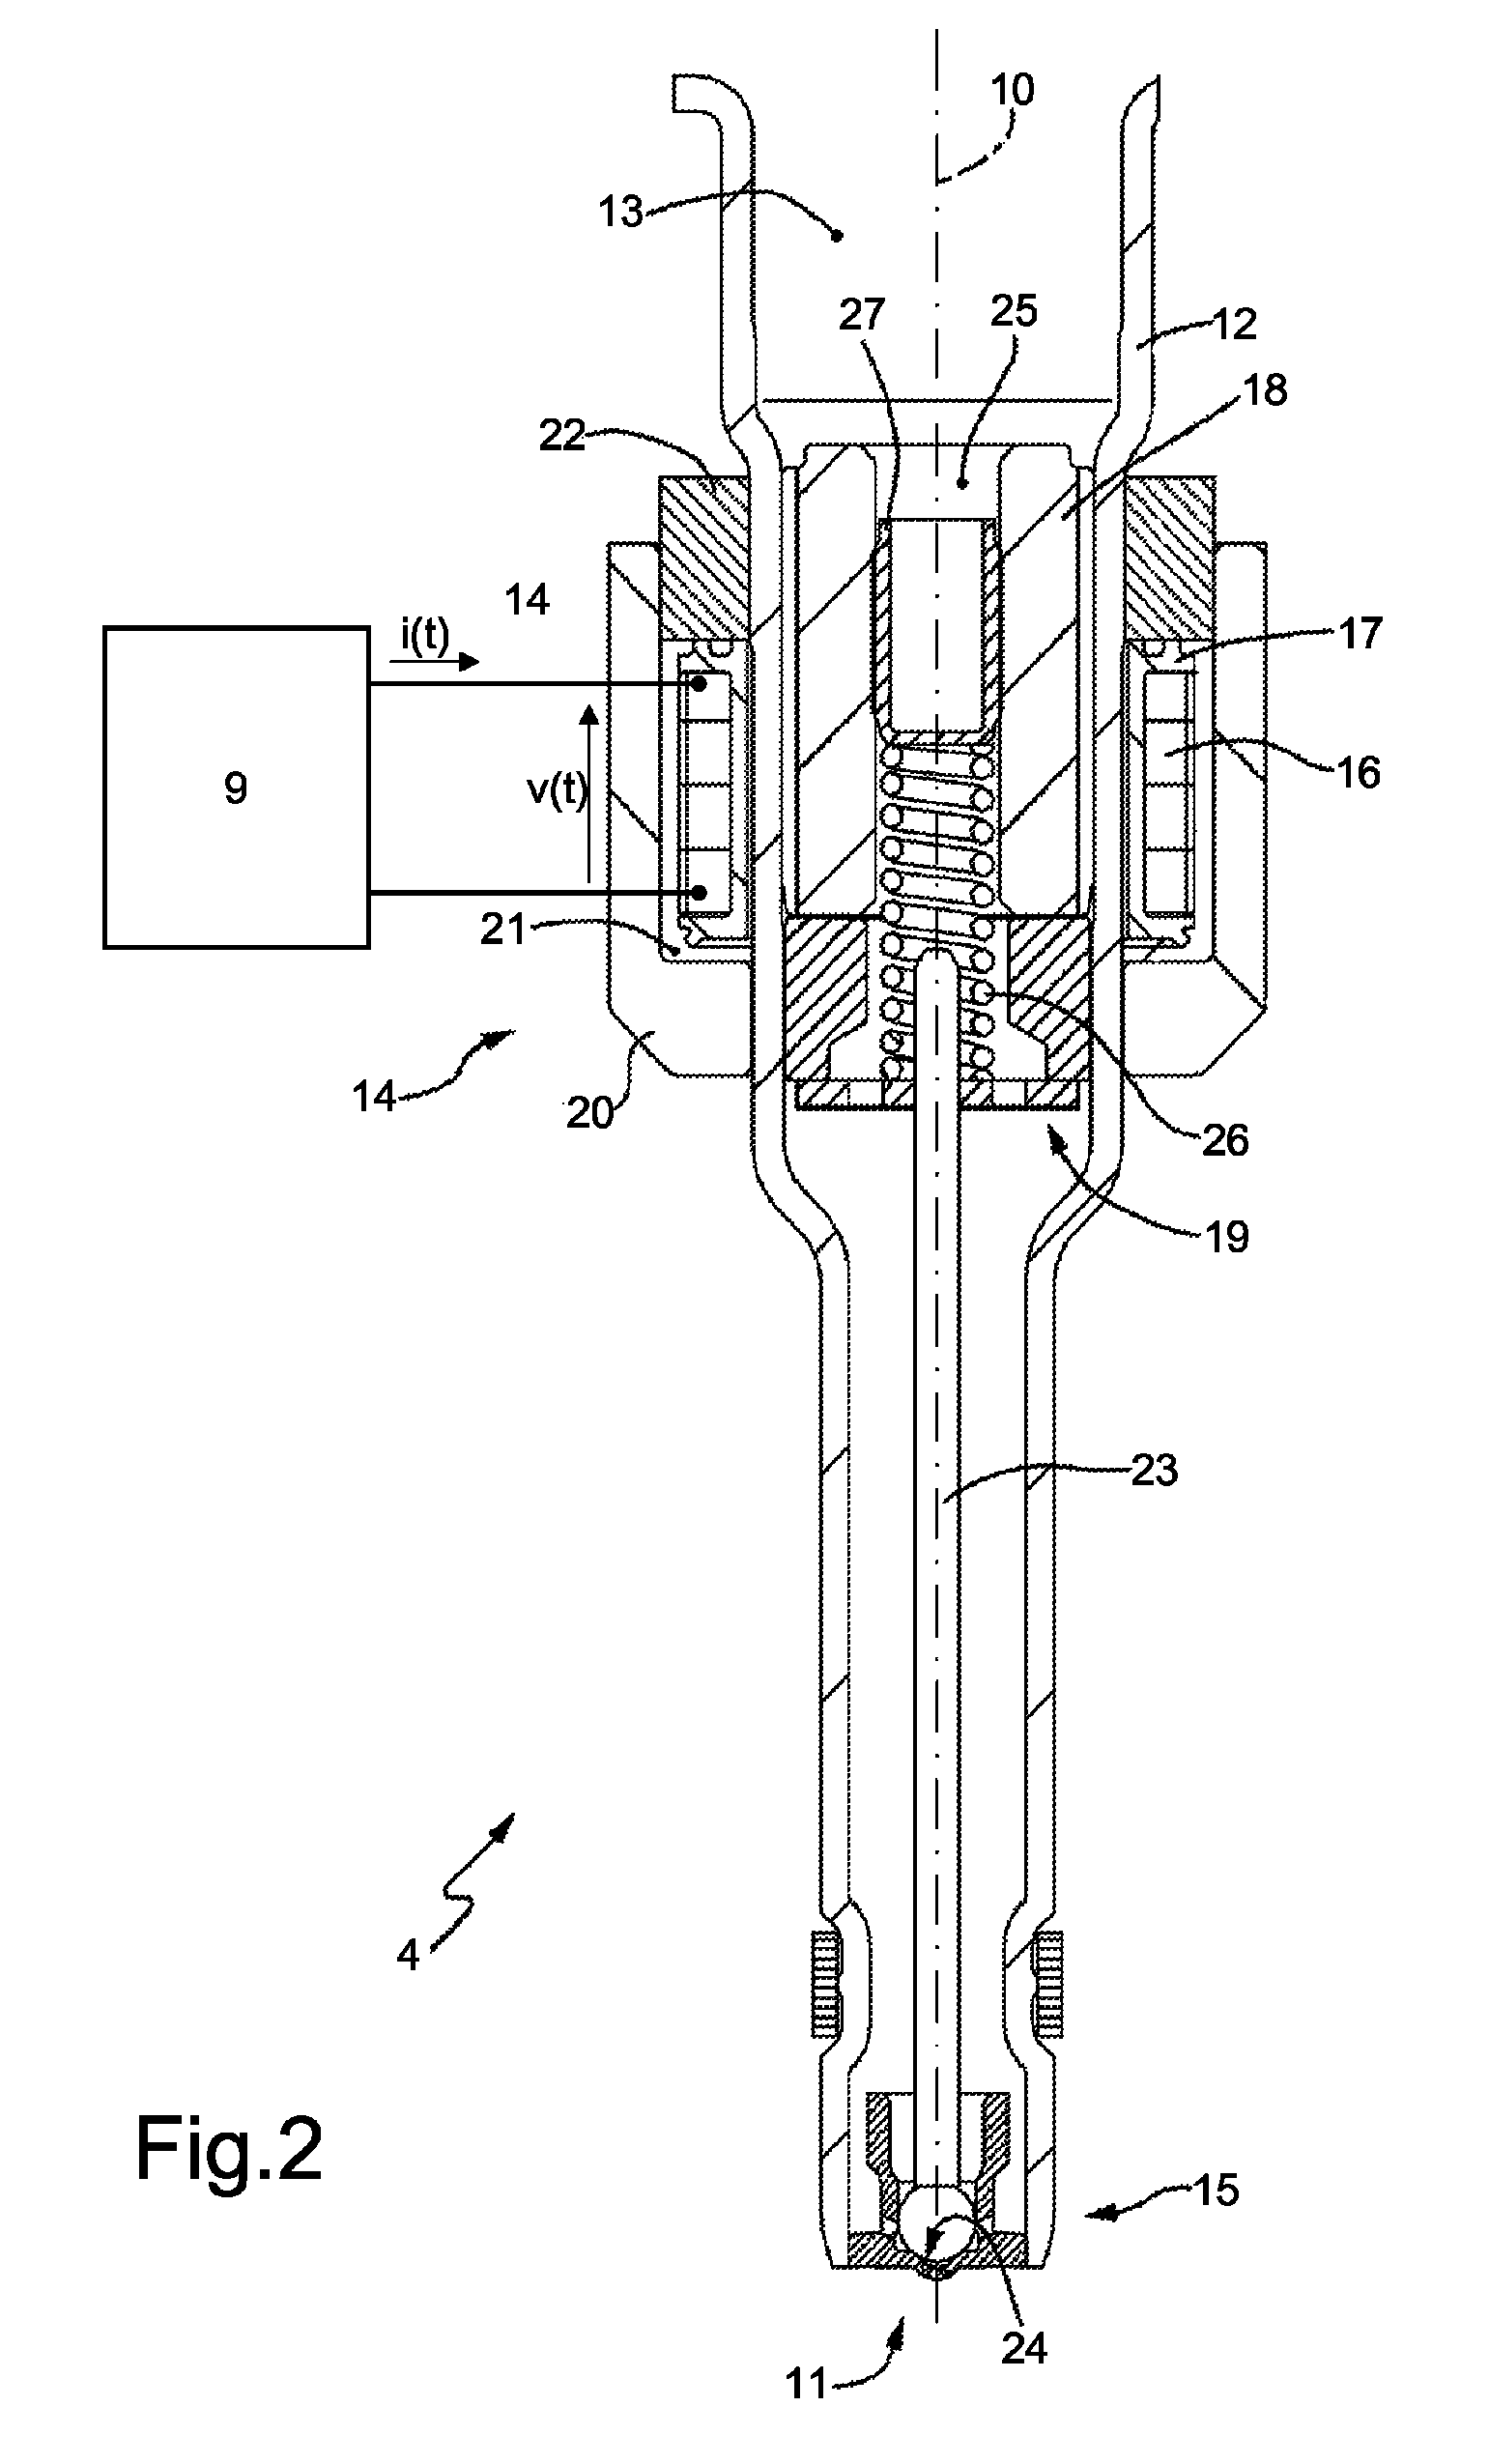 Method for determining the closing time of an electromagnetic fuel injector